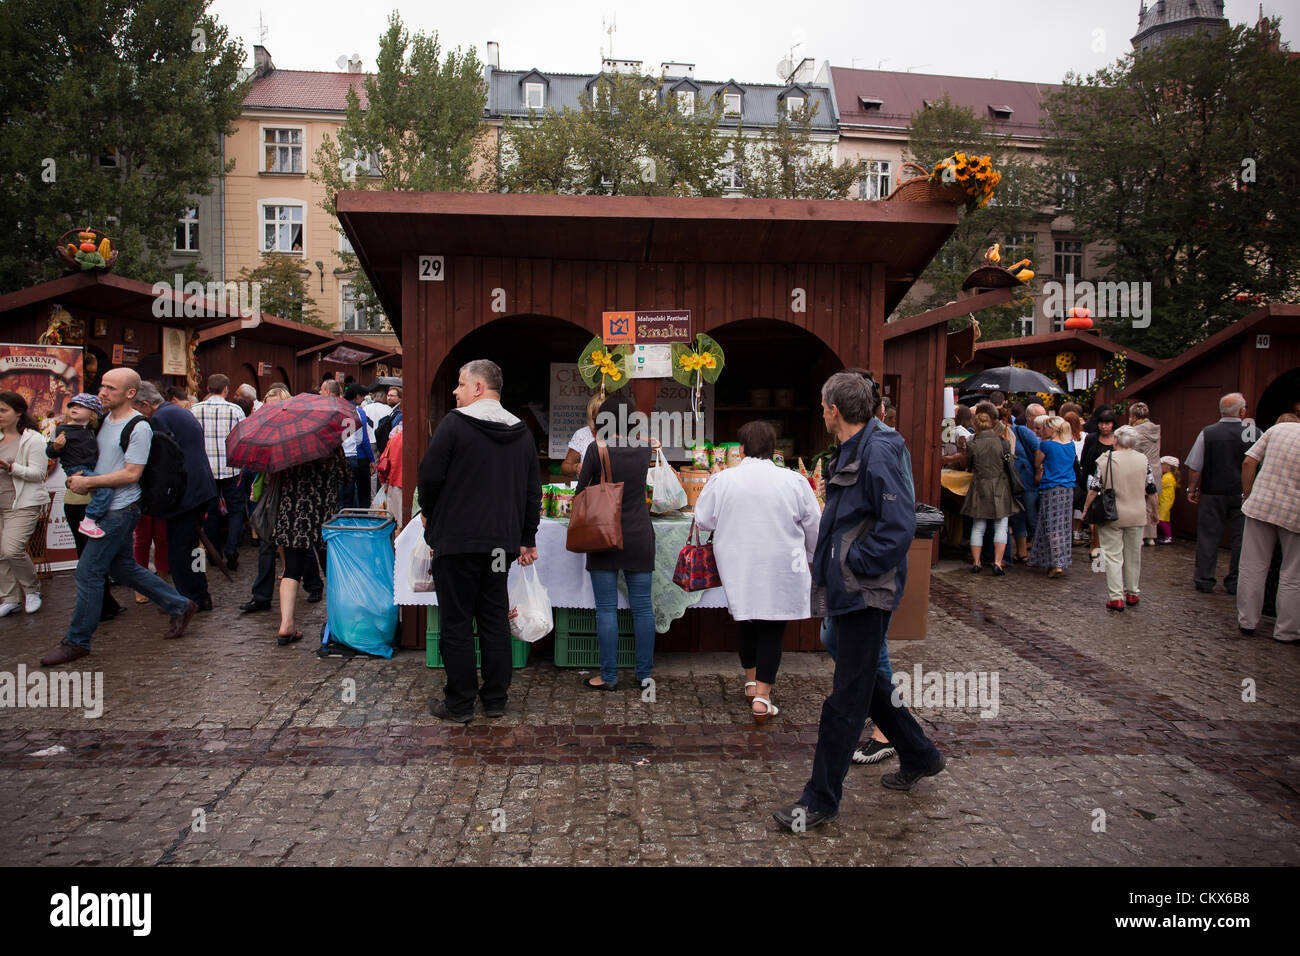 August 26, 2012 Cracow, Poland - Market stall during annual traditional Polish food festival. Stock Photo